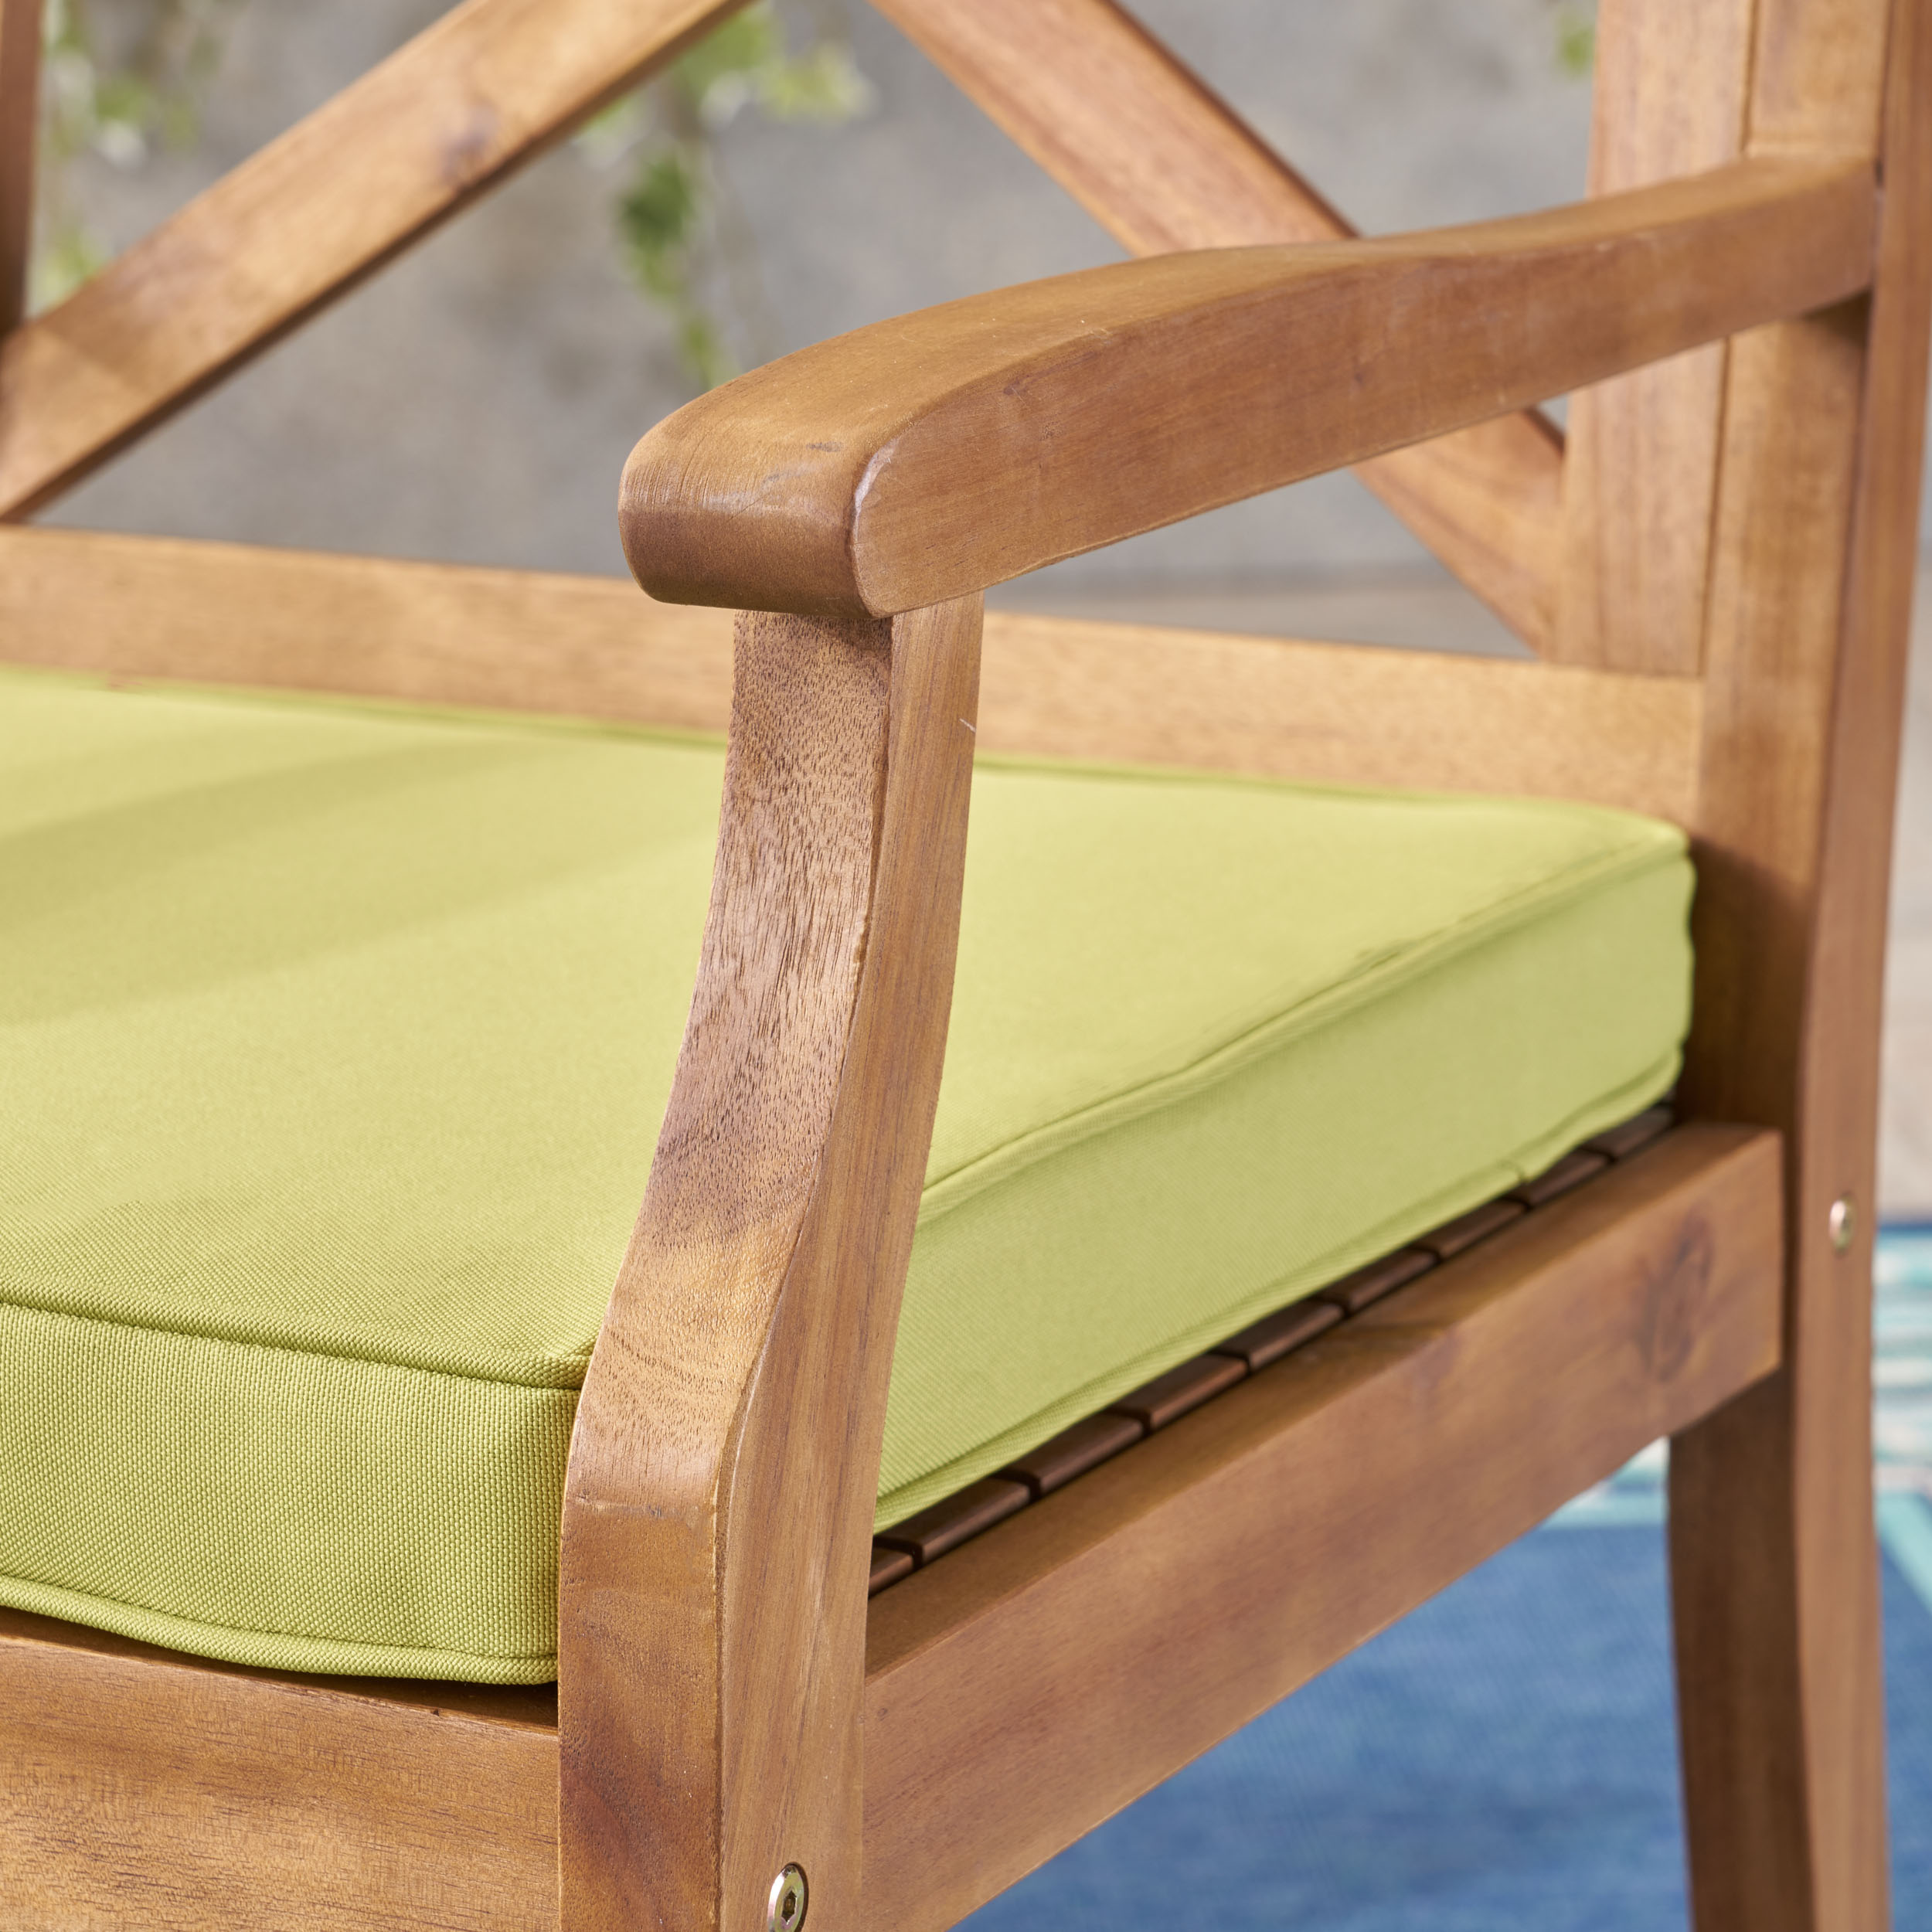 Outdoor Acacia Wood Dining Chair with Cushions, Teak,Green - image 3 of 6